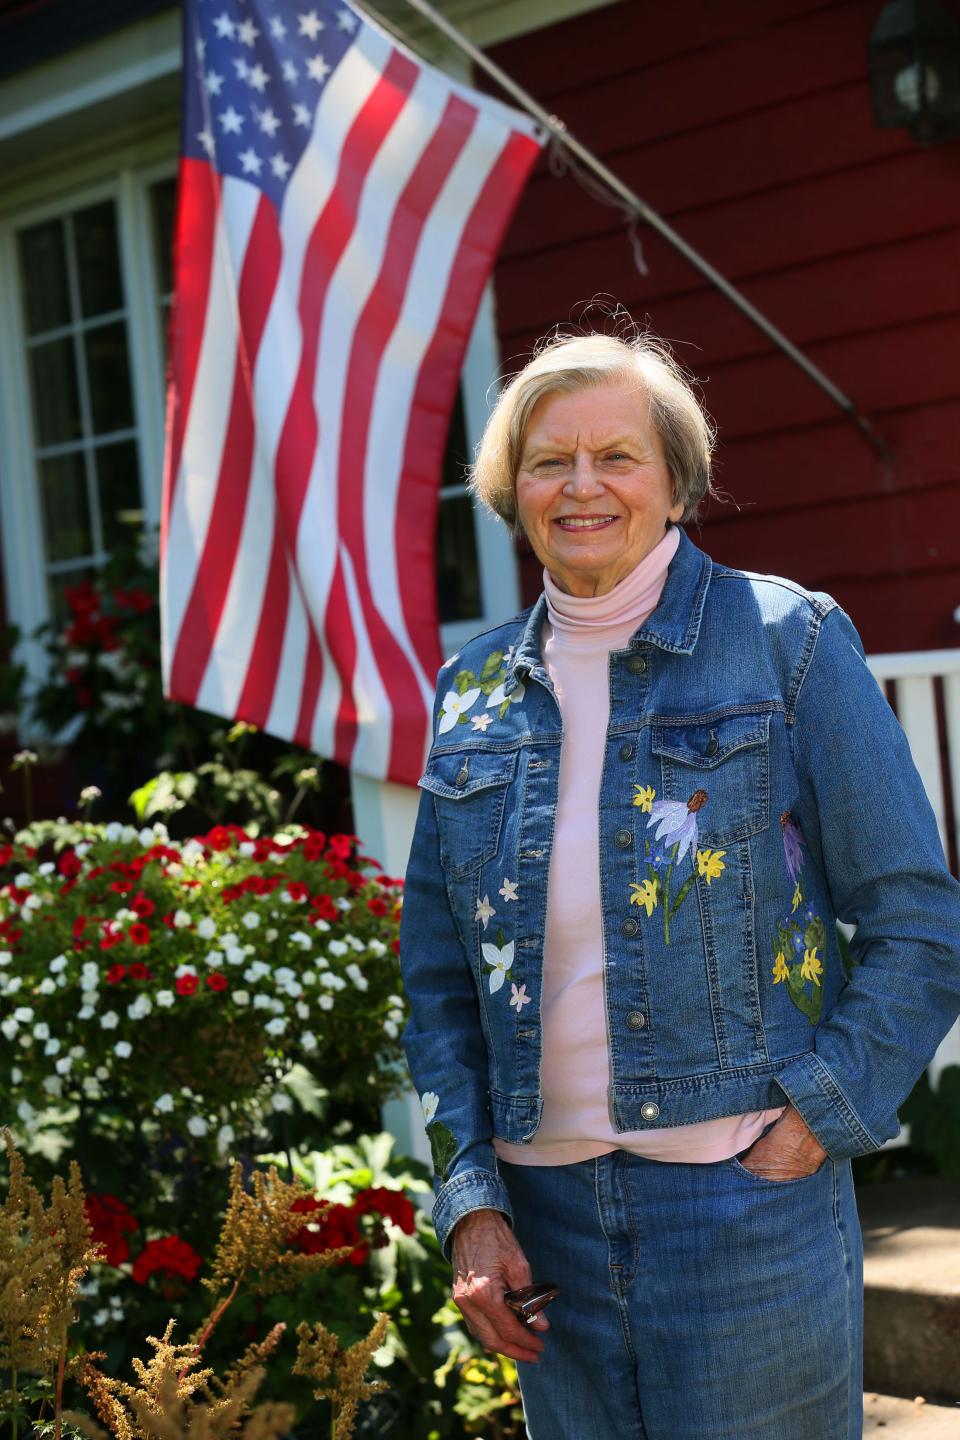 Sally Edgett spends a lot of time gardening at her Fox Point home. The theme of the tour at her home will be "Gardens Gone wild," with the idea that native plants proliferate in sometimes surprising ways.